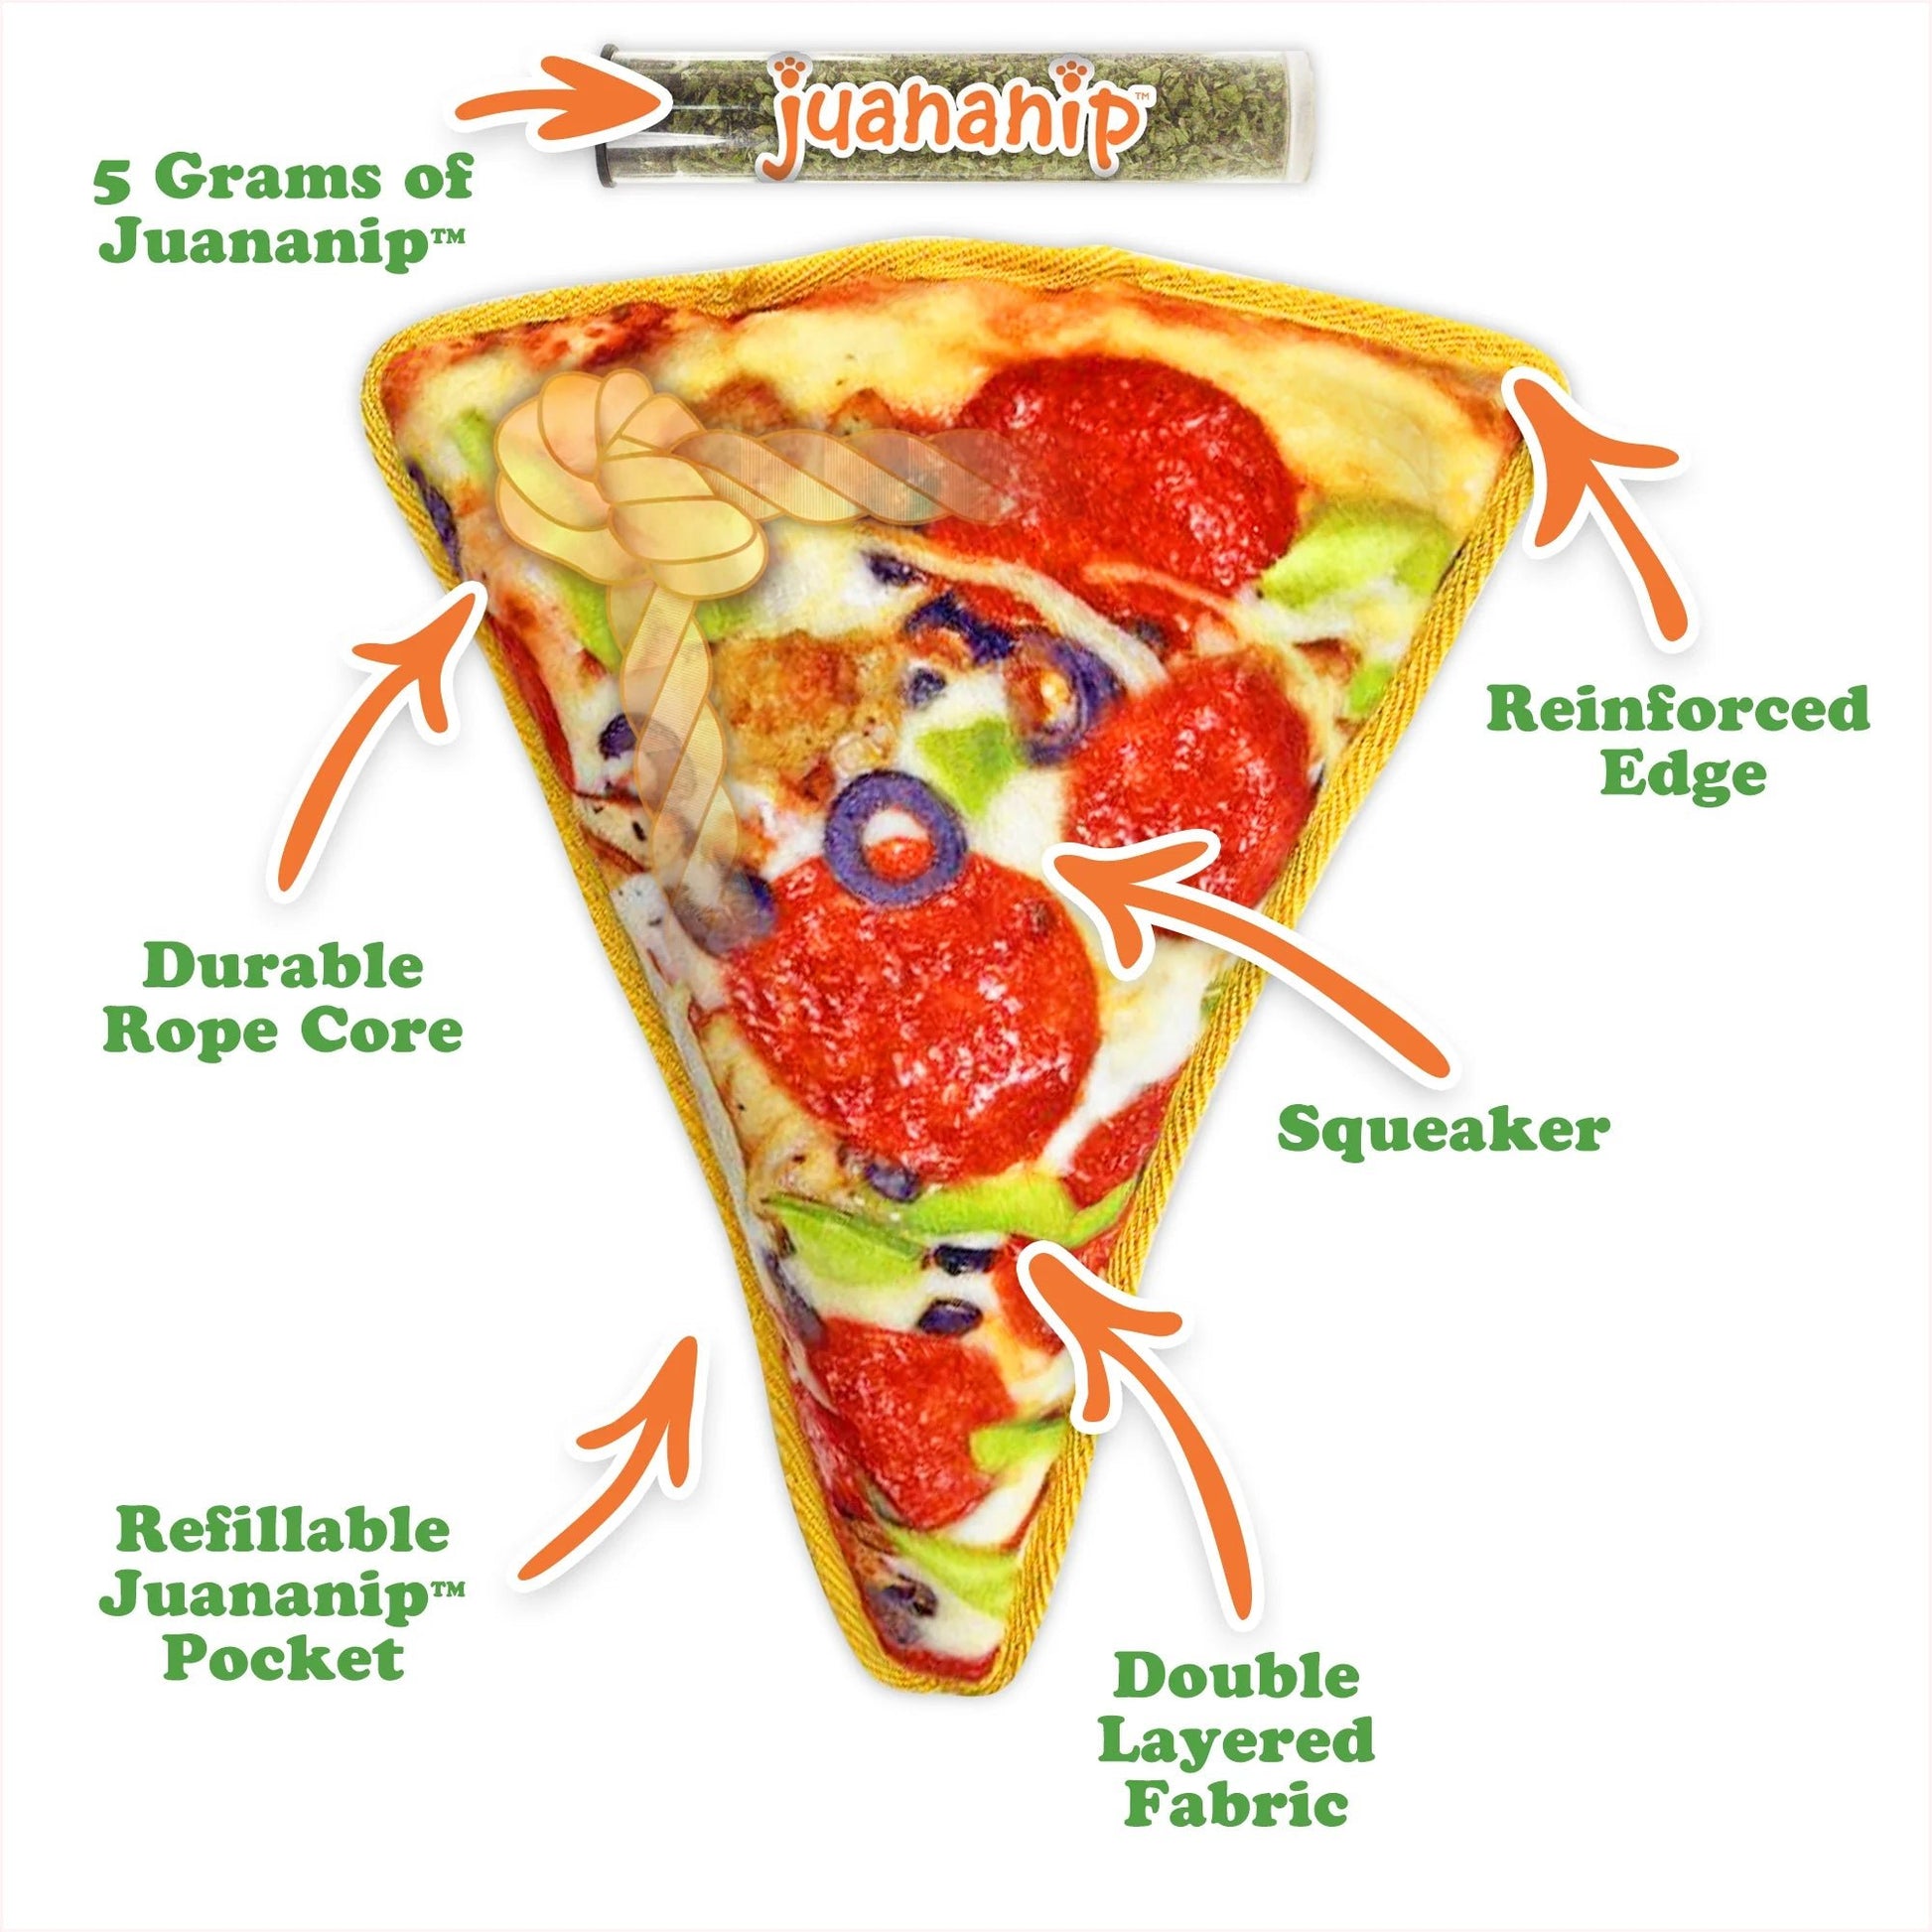 Tuffer Chewer Refillable Supreme Pizza Toy - Wiggles & Whiskers Pet SuppliesKane Pet Supplies